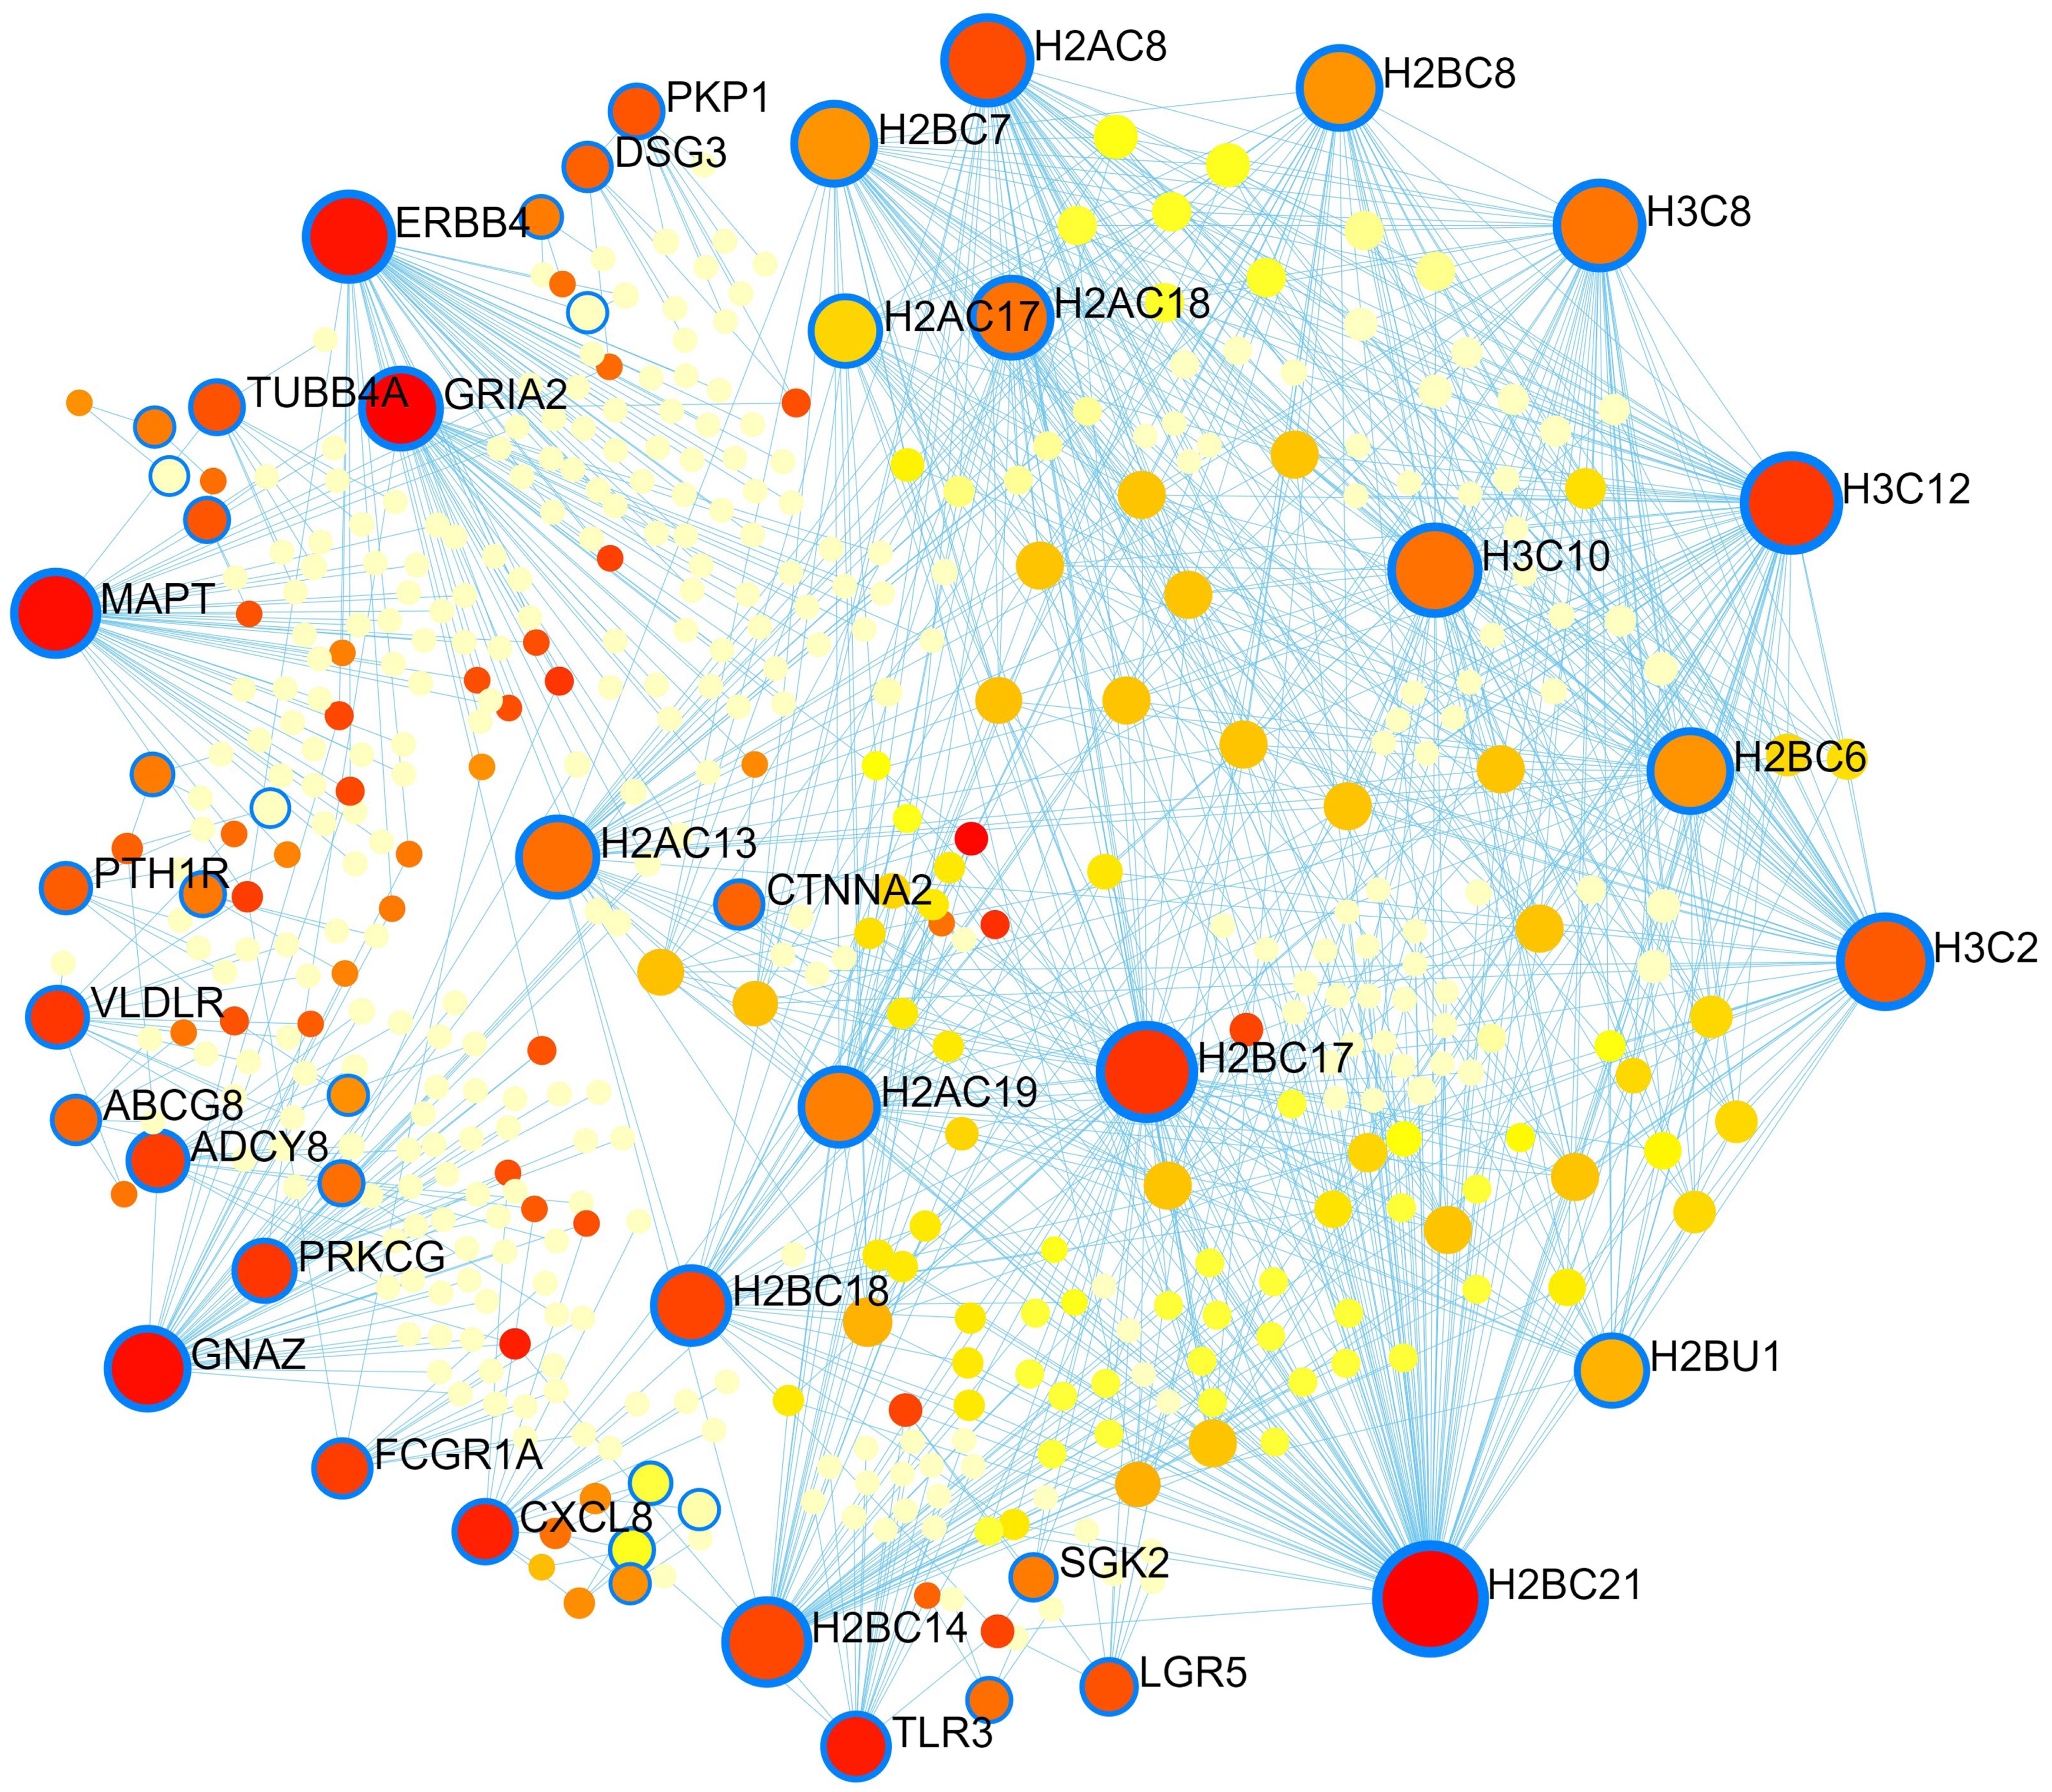 PPI network of the top 100 upregulated and top 100 downregulated genes identified in GC.